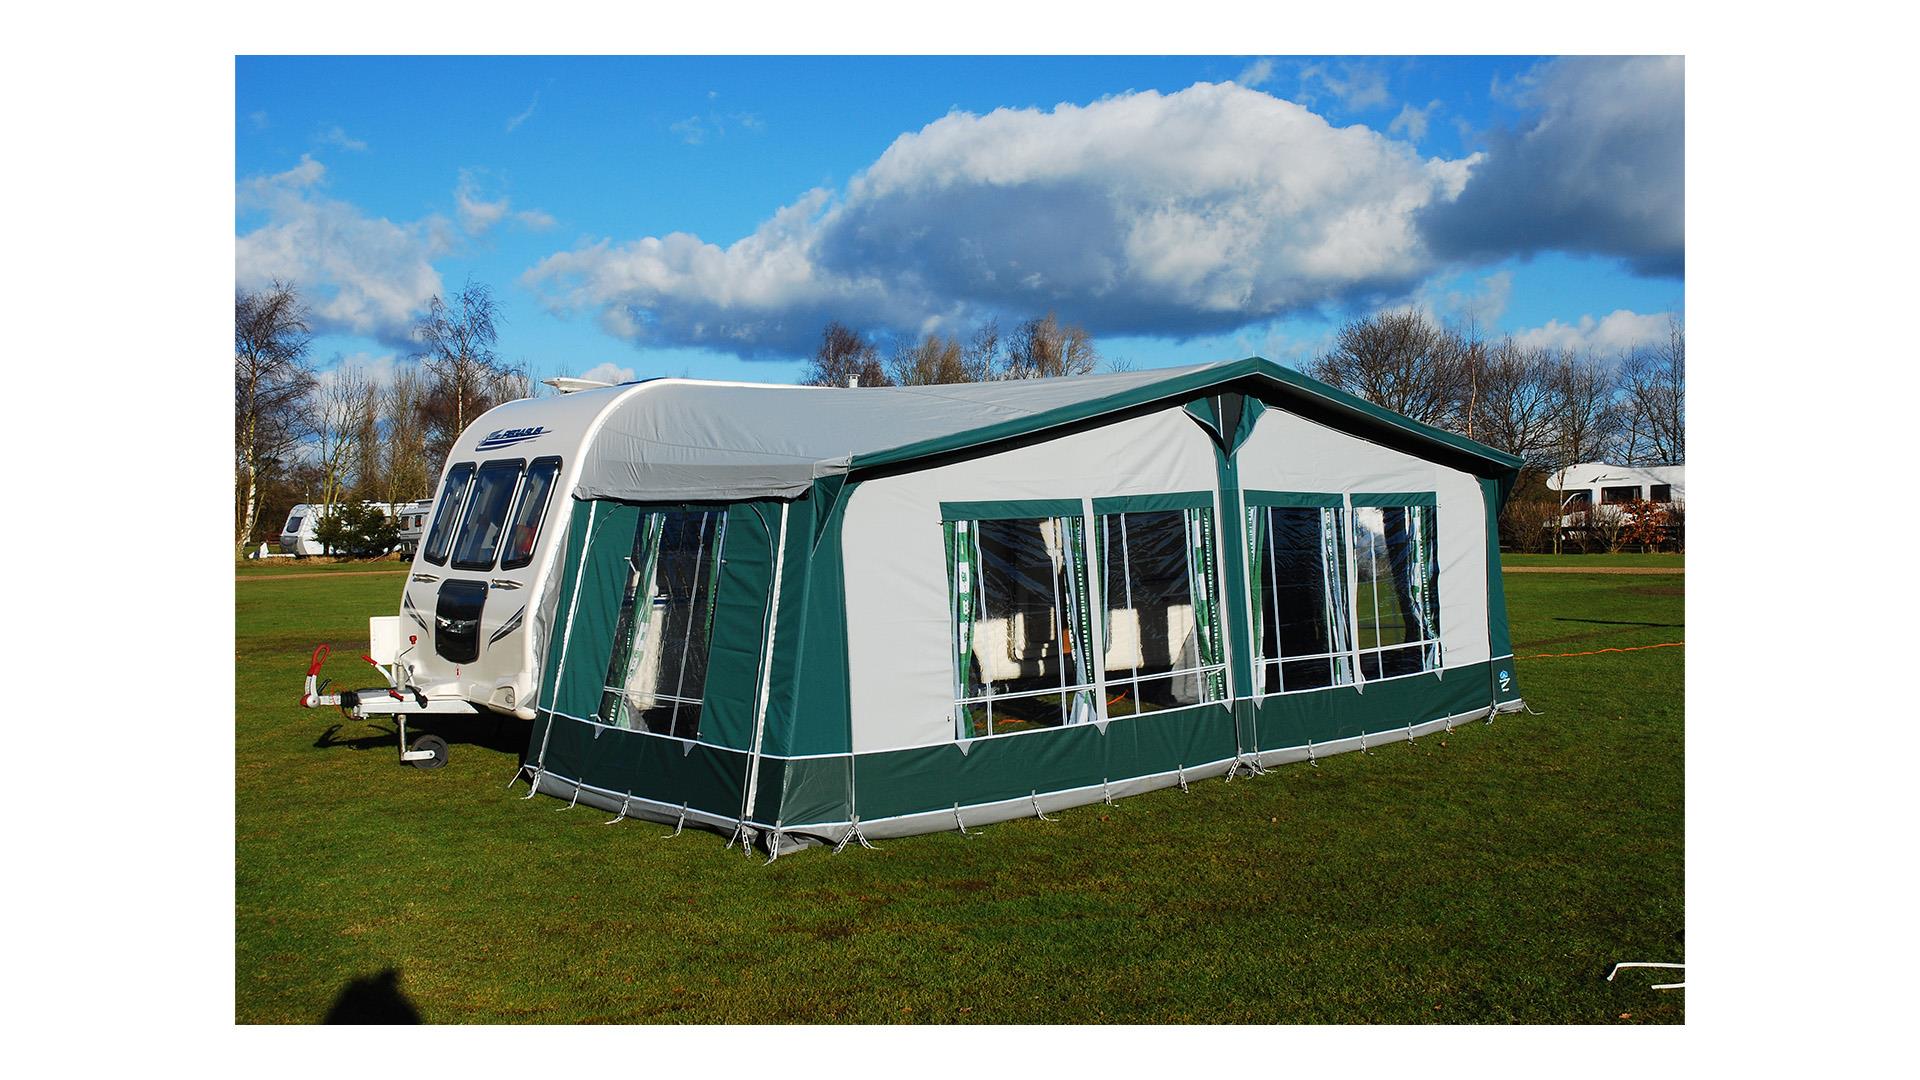 Awning to increase space